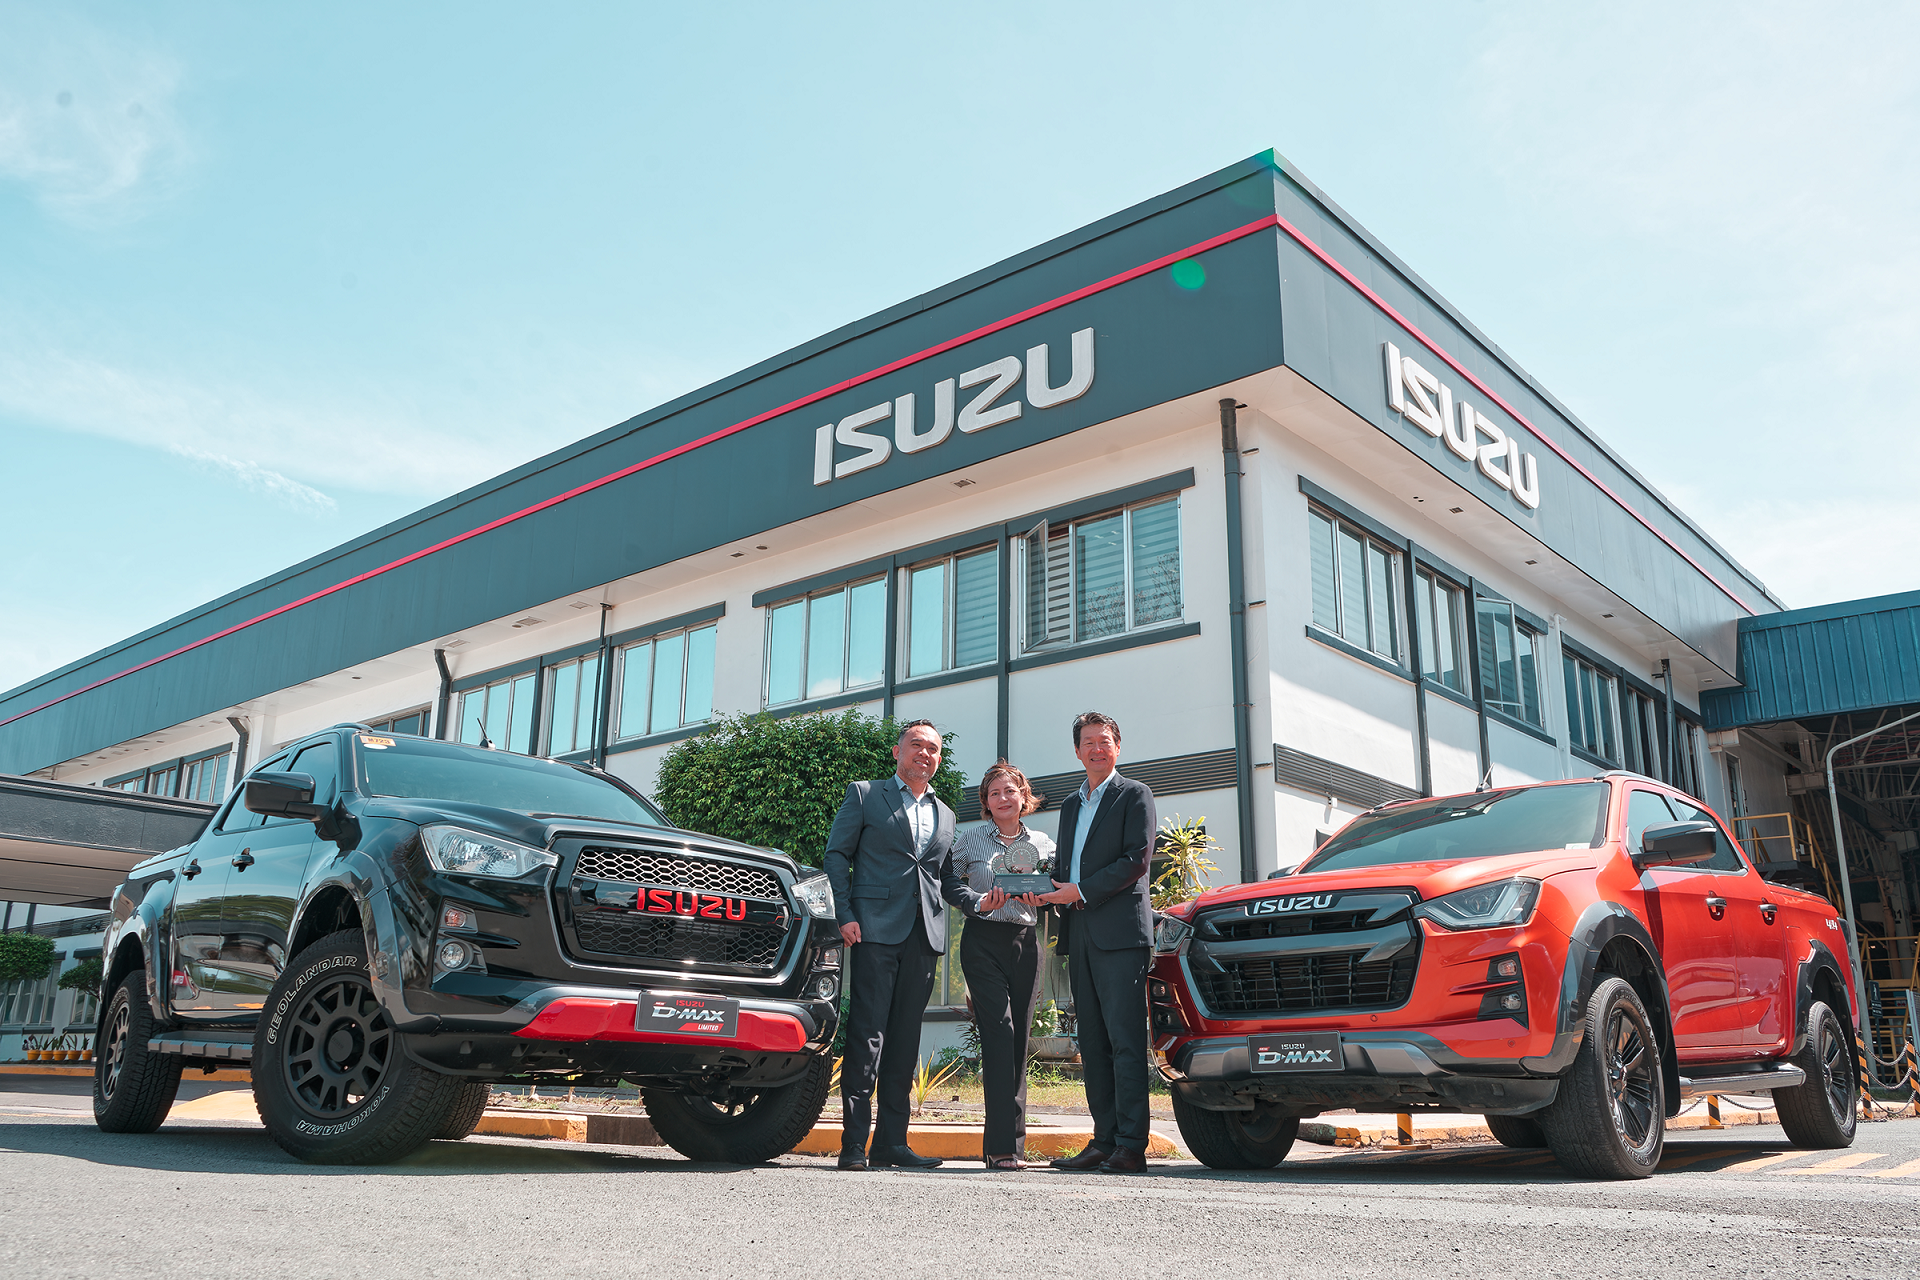 Isuzu D-MAX clinches C! Magazine “Pick-up of the Year” Awards for third consecutive year image